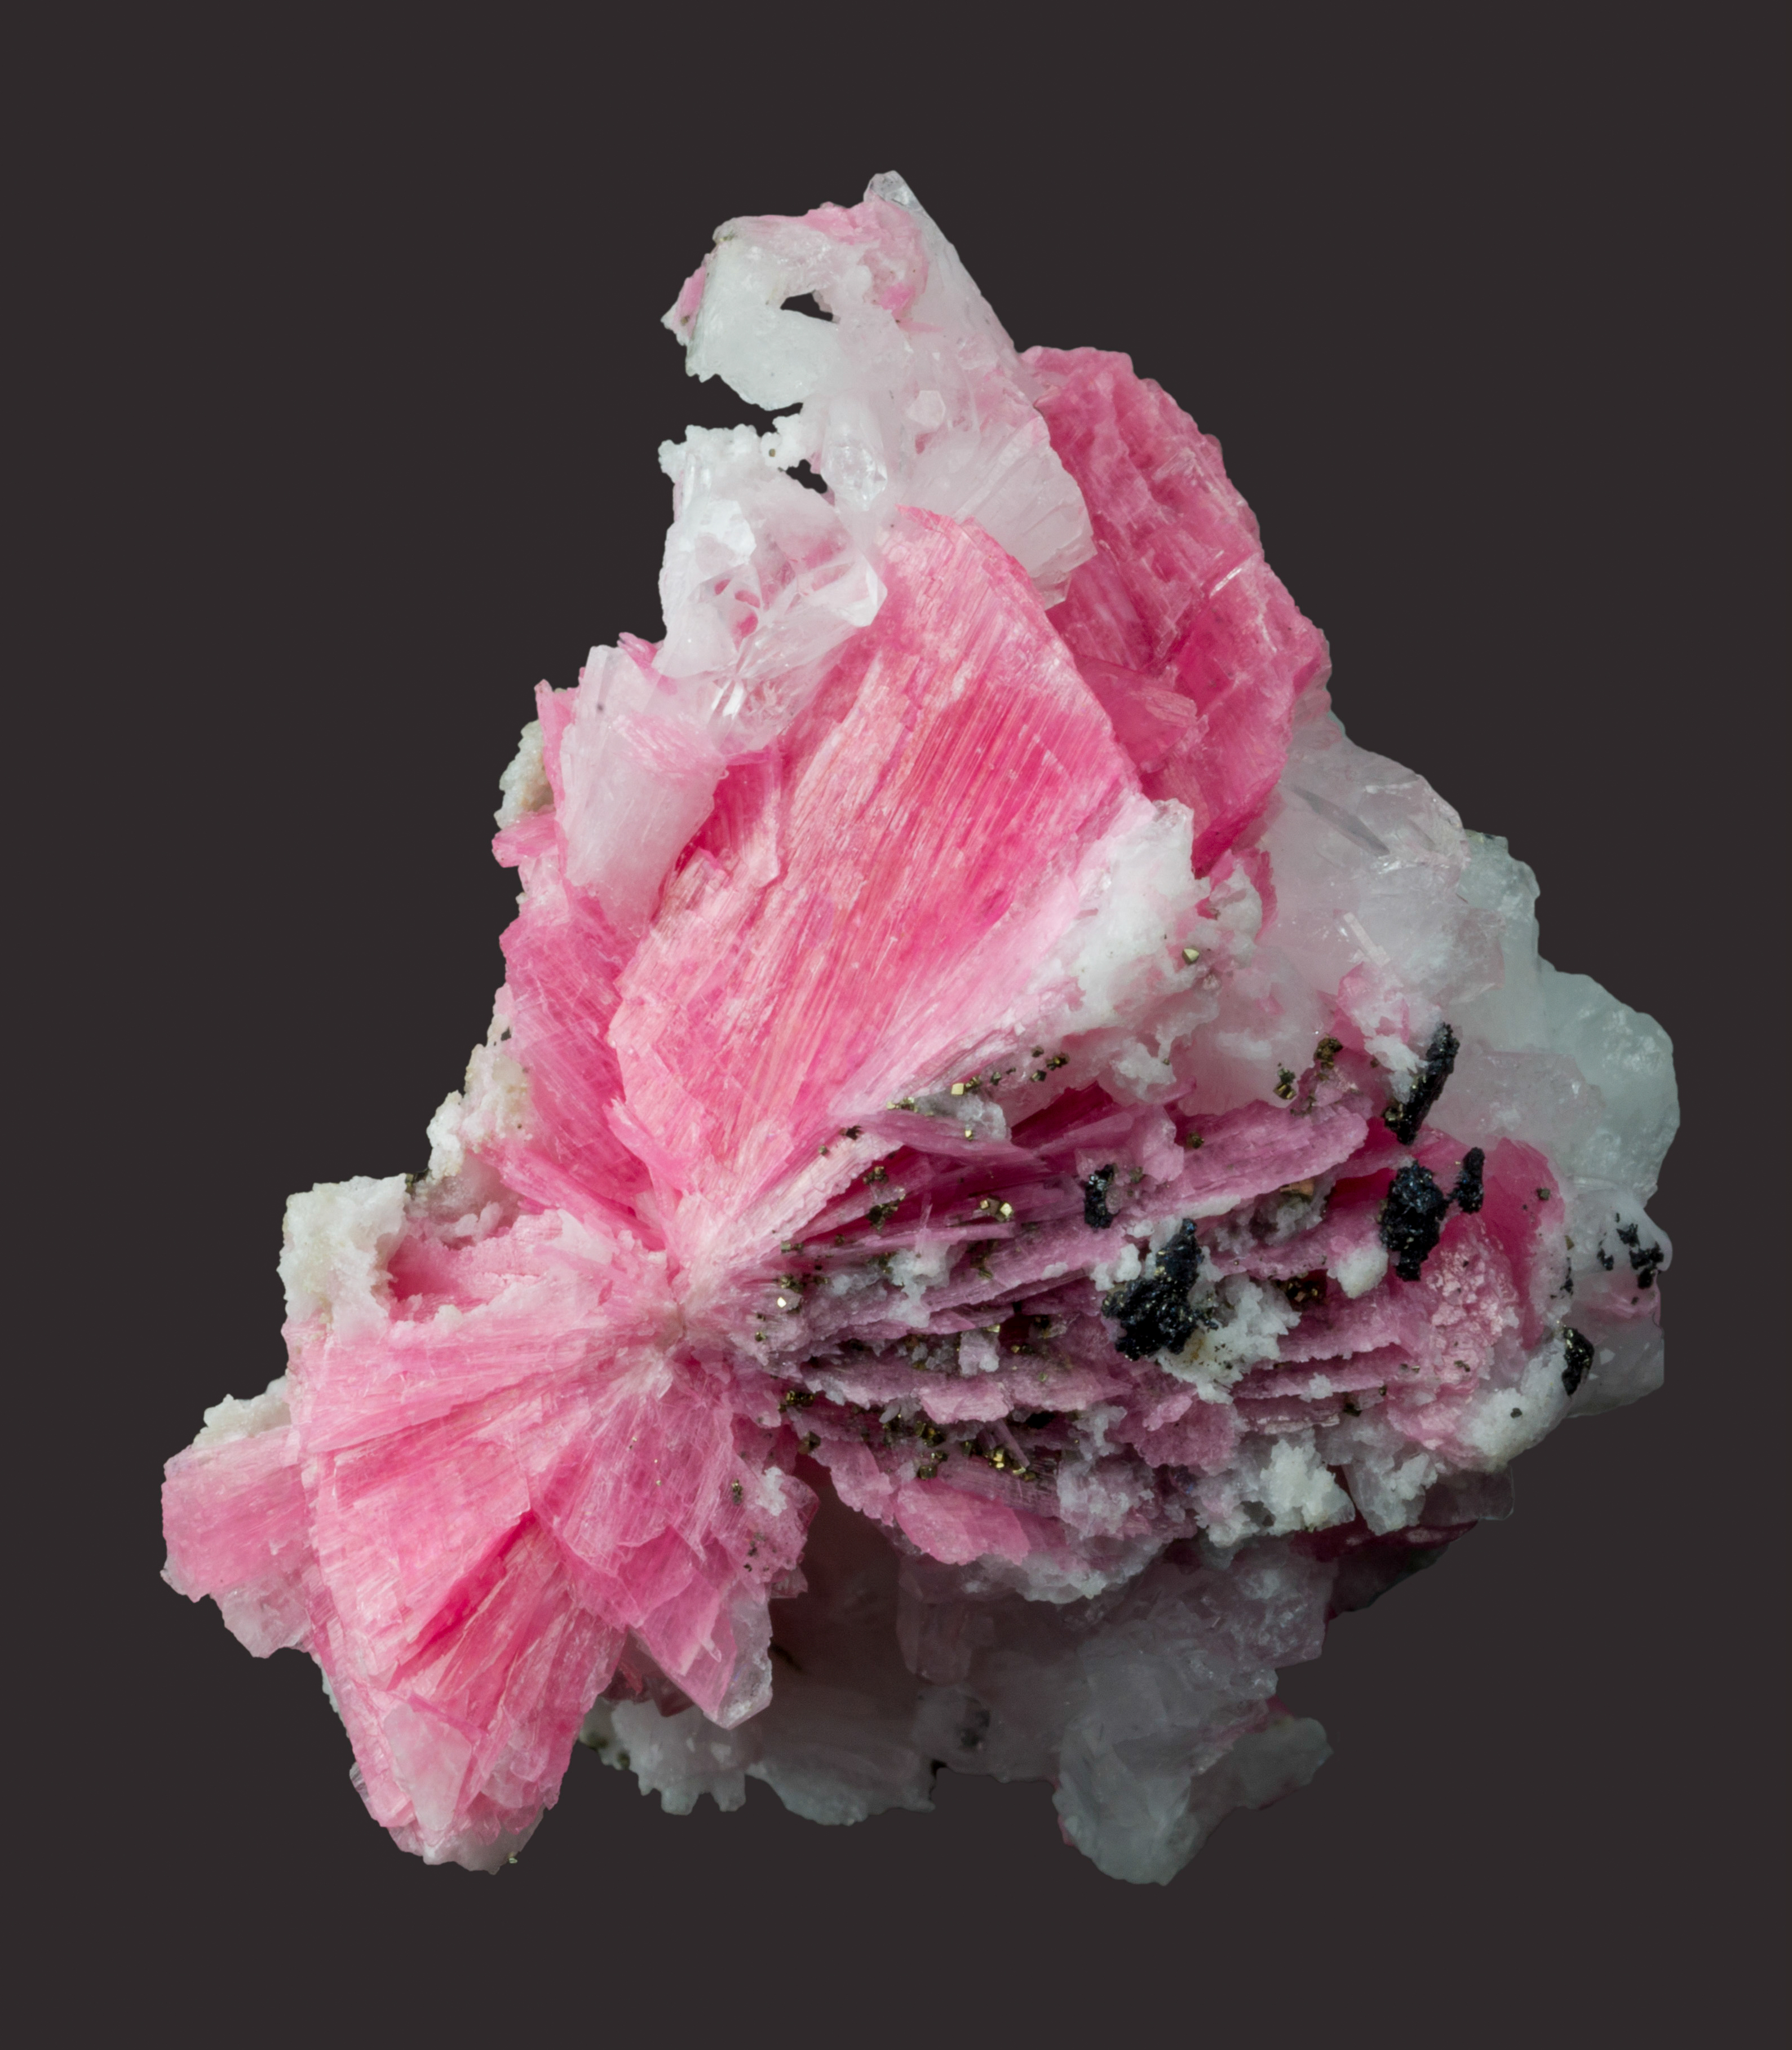 Rhodonite crystals with quartz and chalcopyrite. Largest crystal is 15 mm in a 4 cm group. San Martin Mine, Ancash, Peru.